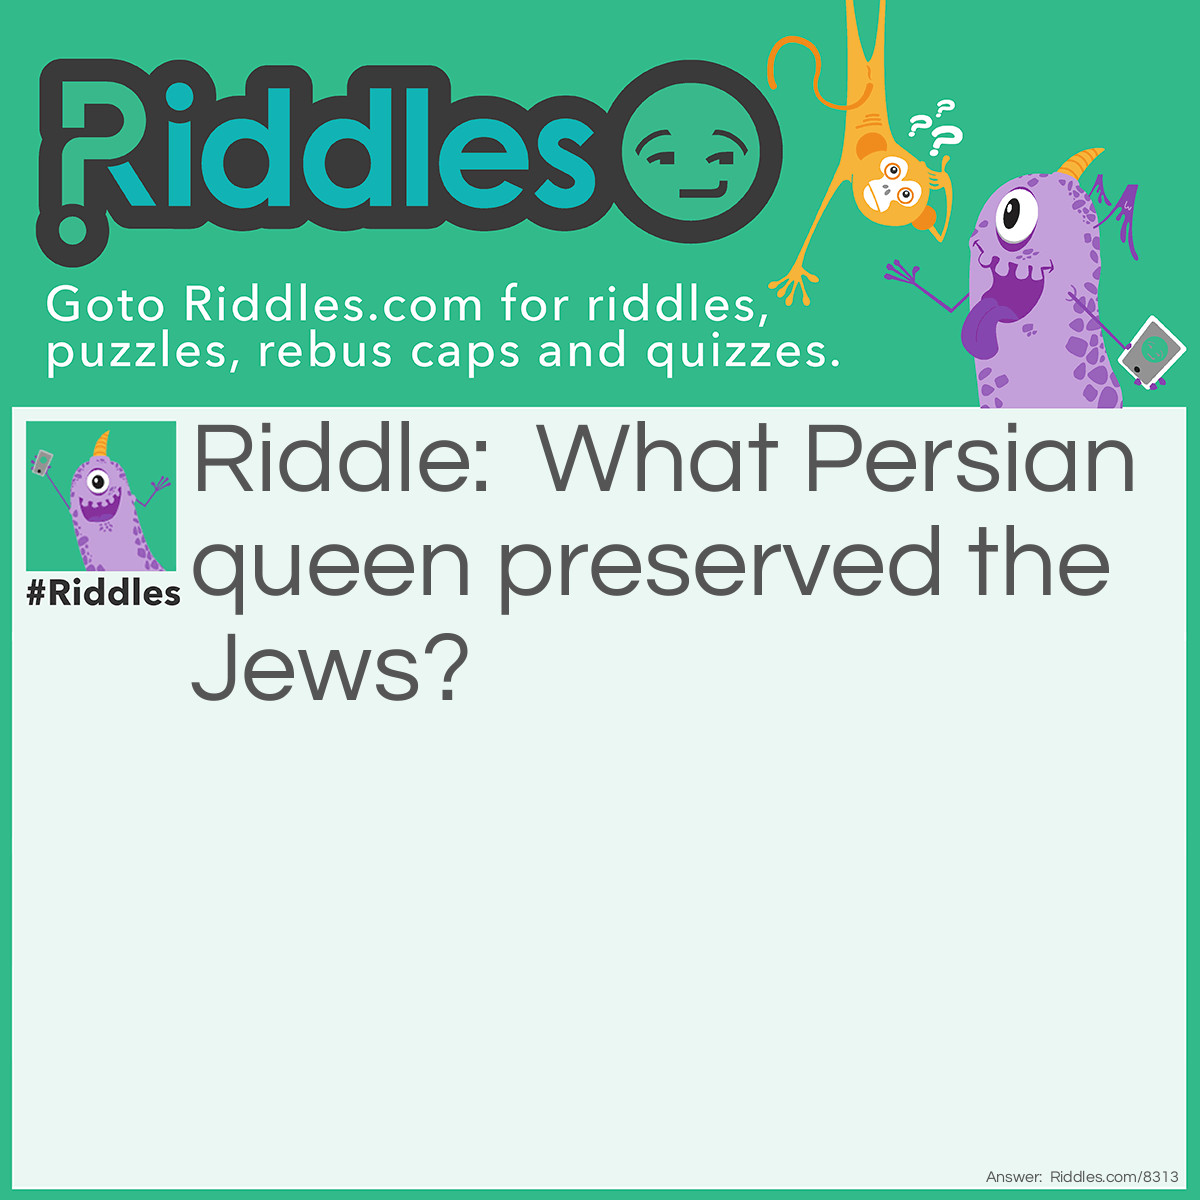 Riddle: What Persian queen preserved the Jews? Answer: Hadaosoh—Esther viii. 7.